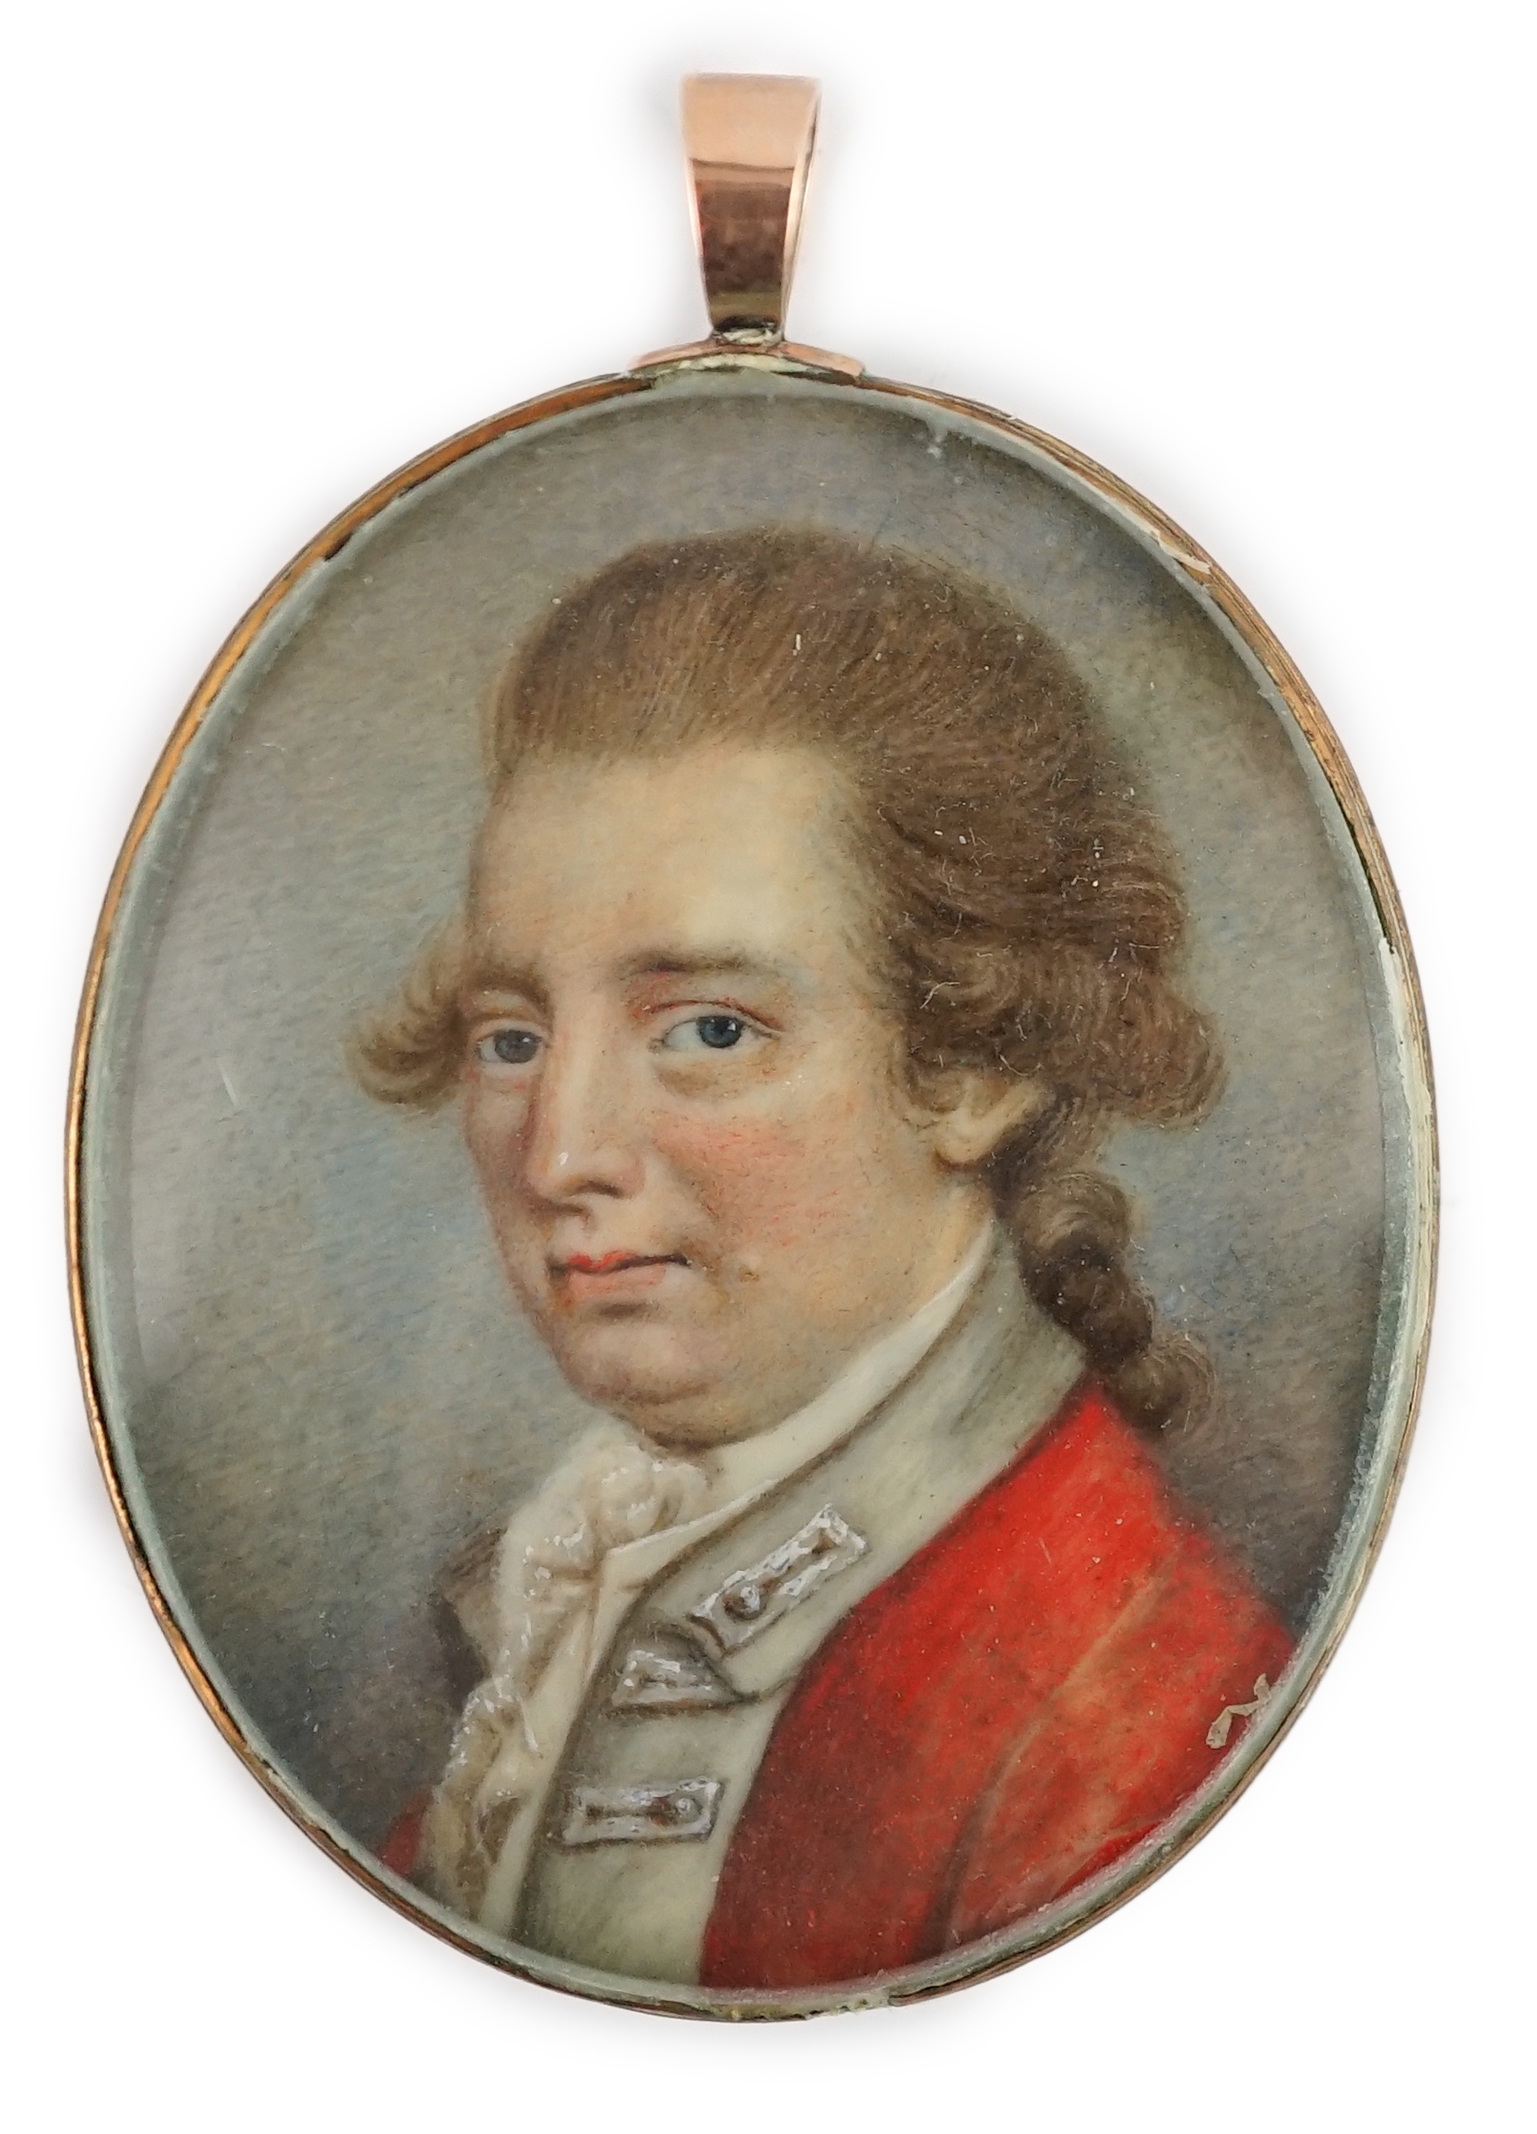 English School circa 1780, Portrait miniature of a gentleman, oil on ivory, 4 x 3.2cm. CITES Submission reference 4VYCC9RL